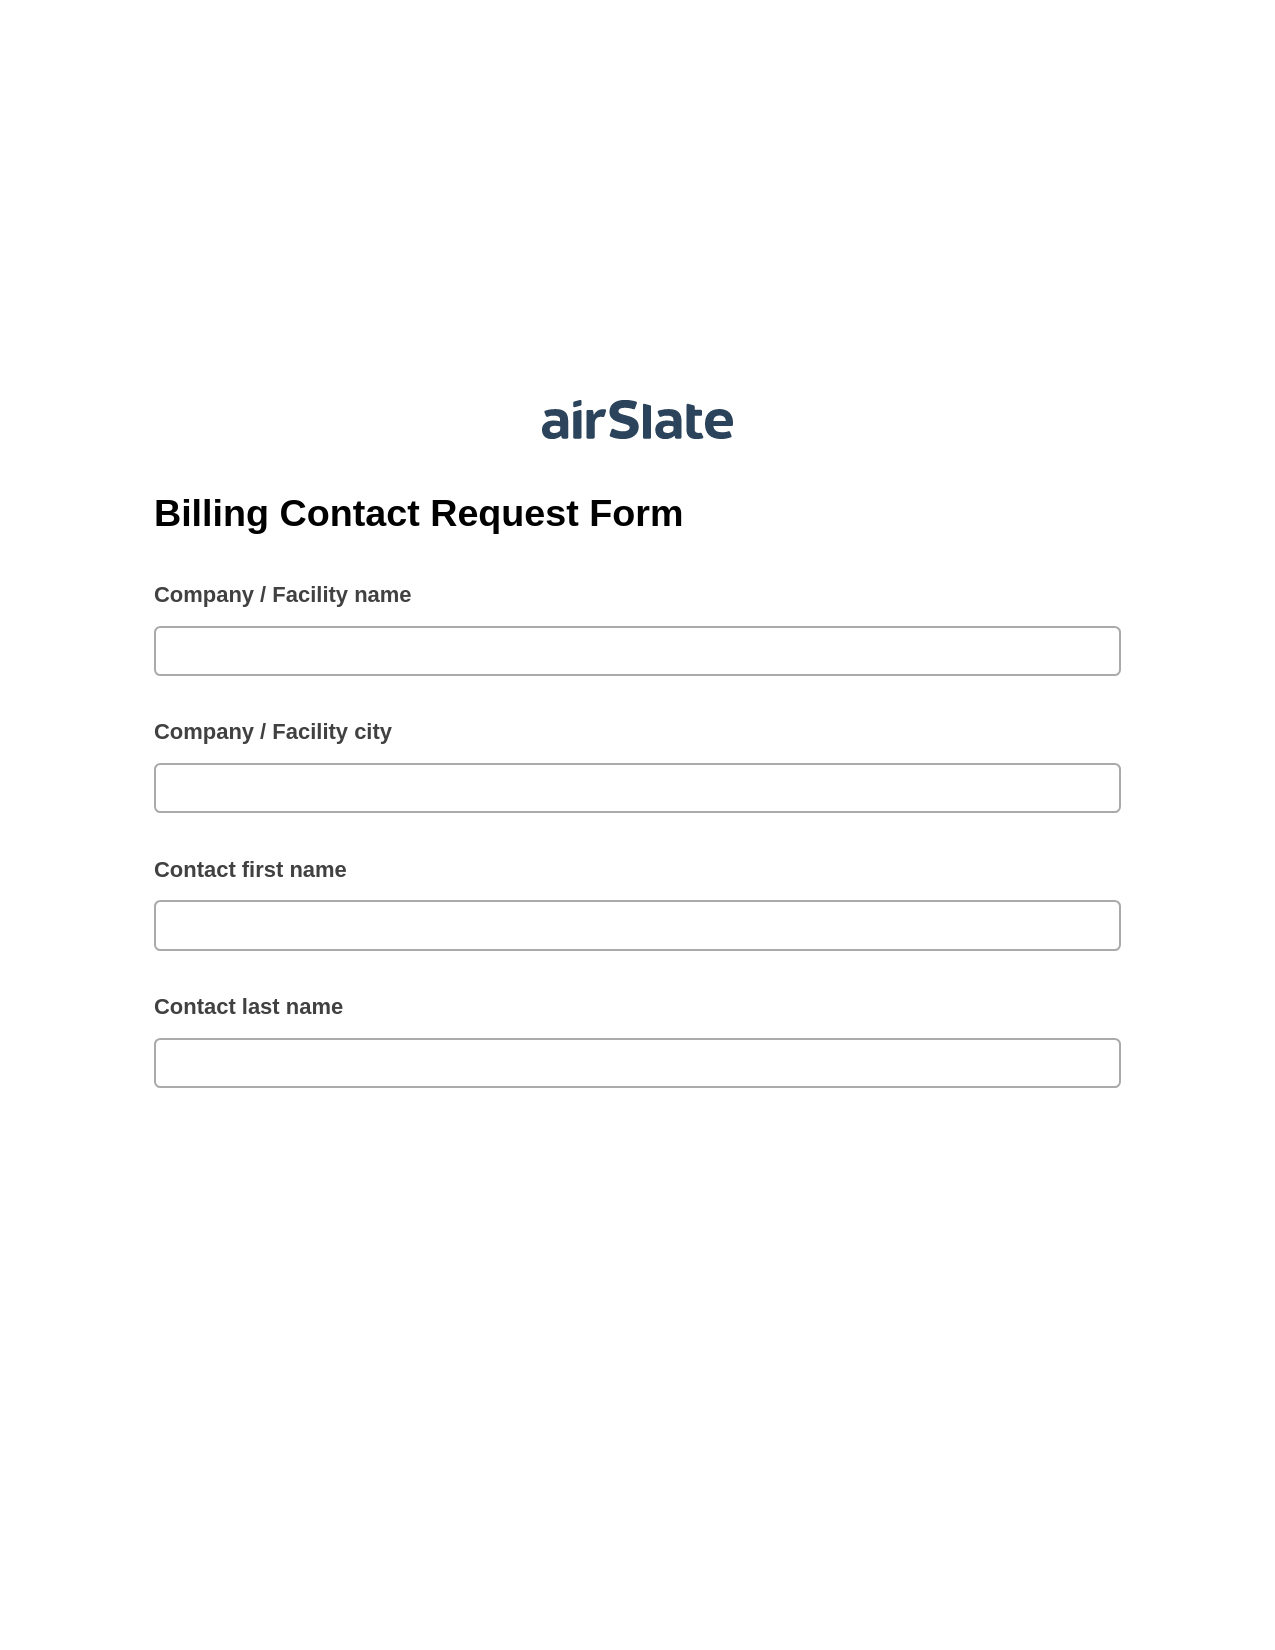 Multirole Billing Contact Request Form System Bot - Slack Two-Way Binding Bot, Assign Slate Name Bot, Archive to SharePoint Folder Bot